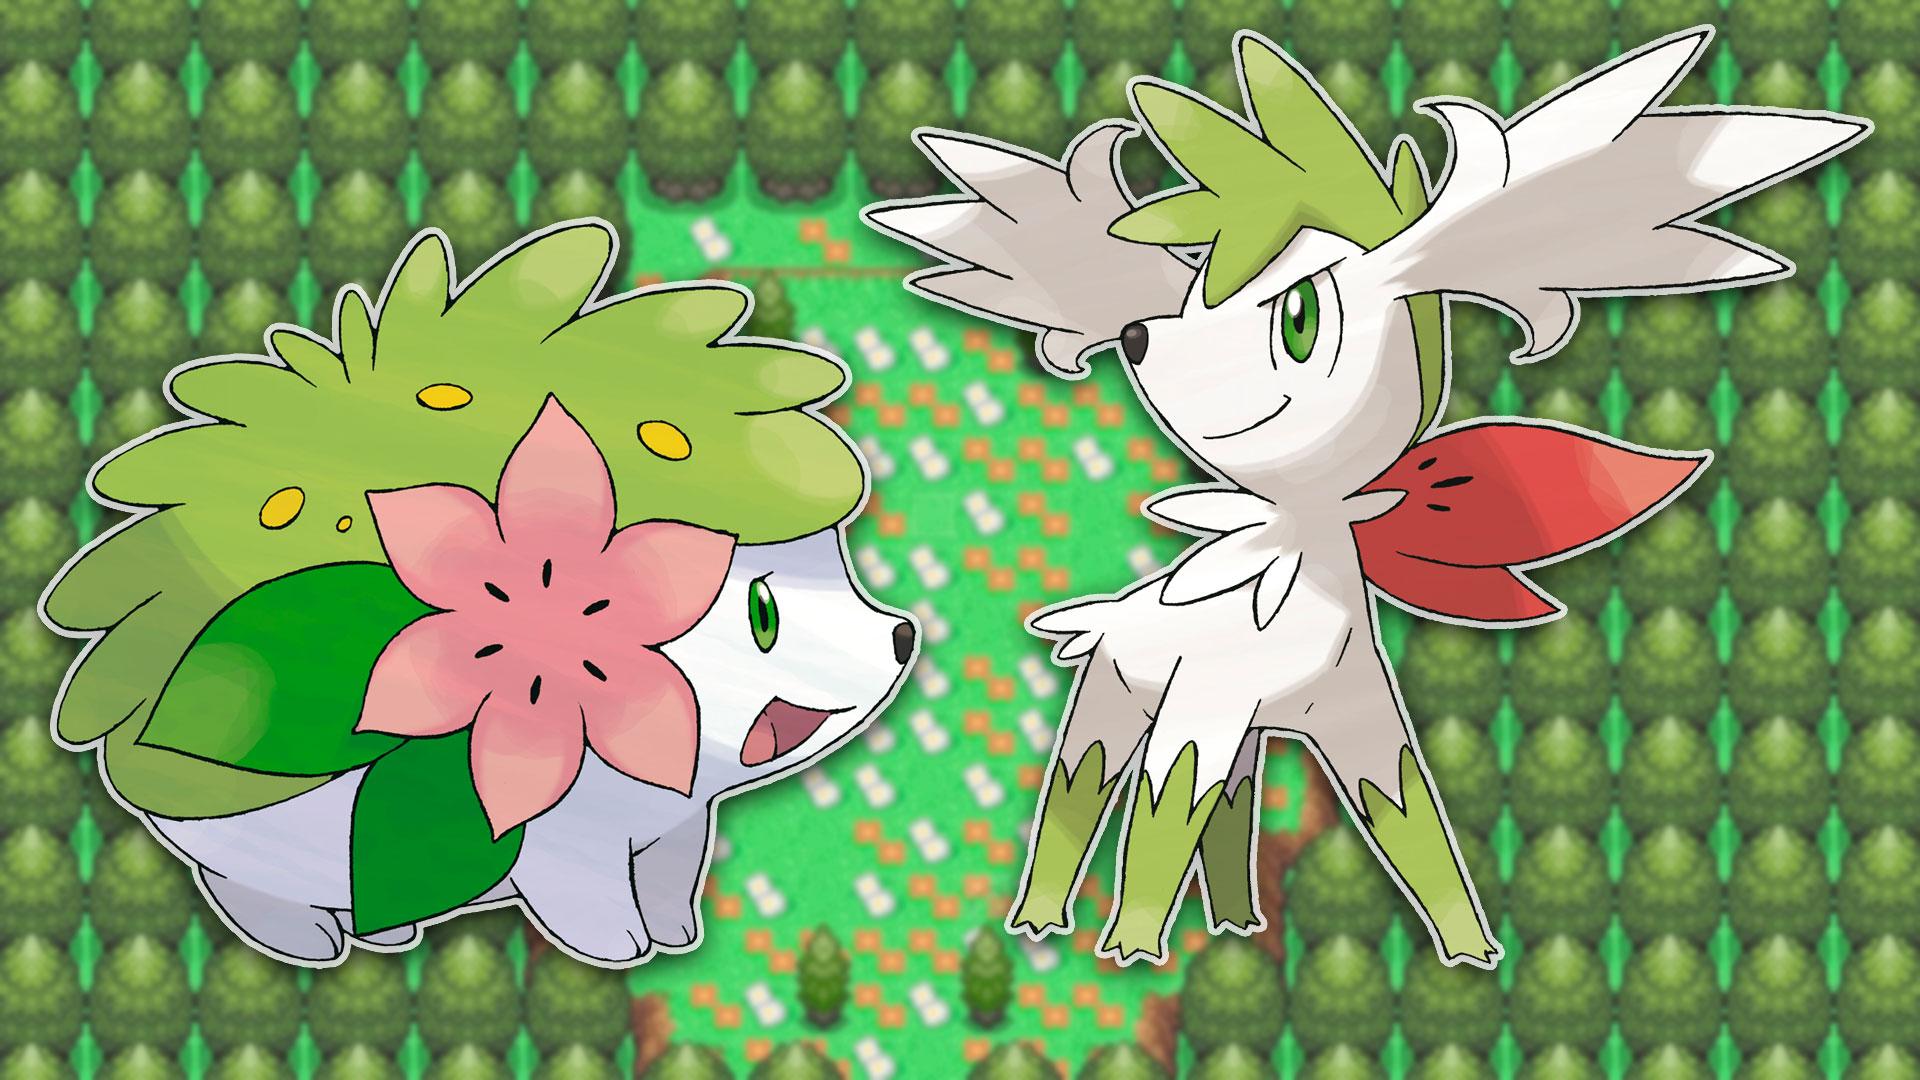 How to get Shaymin in Pokemon Go: Land & Sky Forme explained - Dexerto